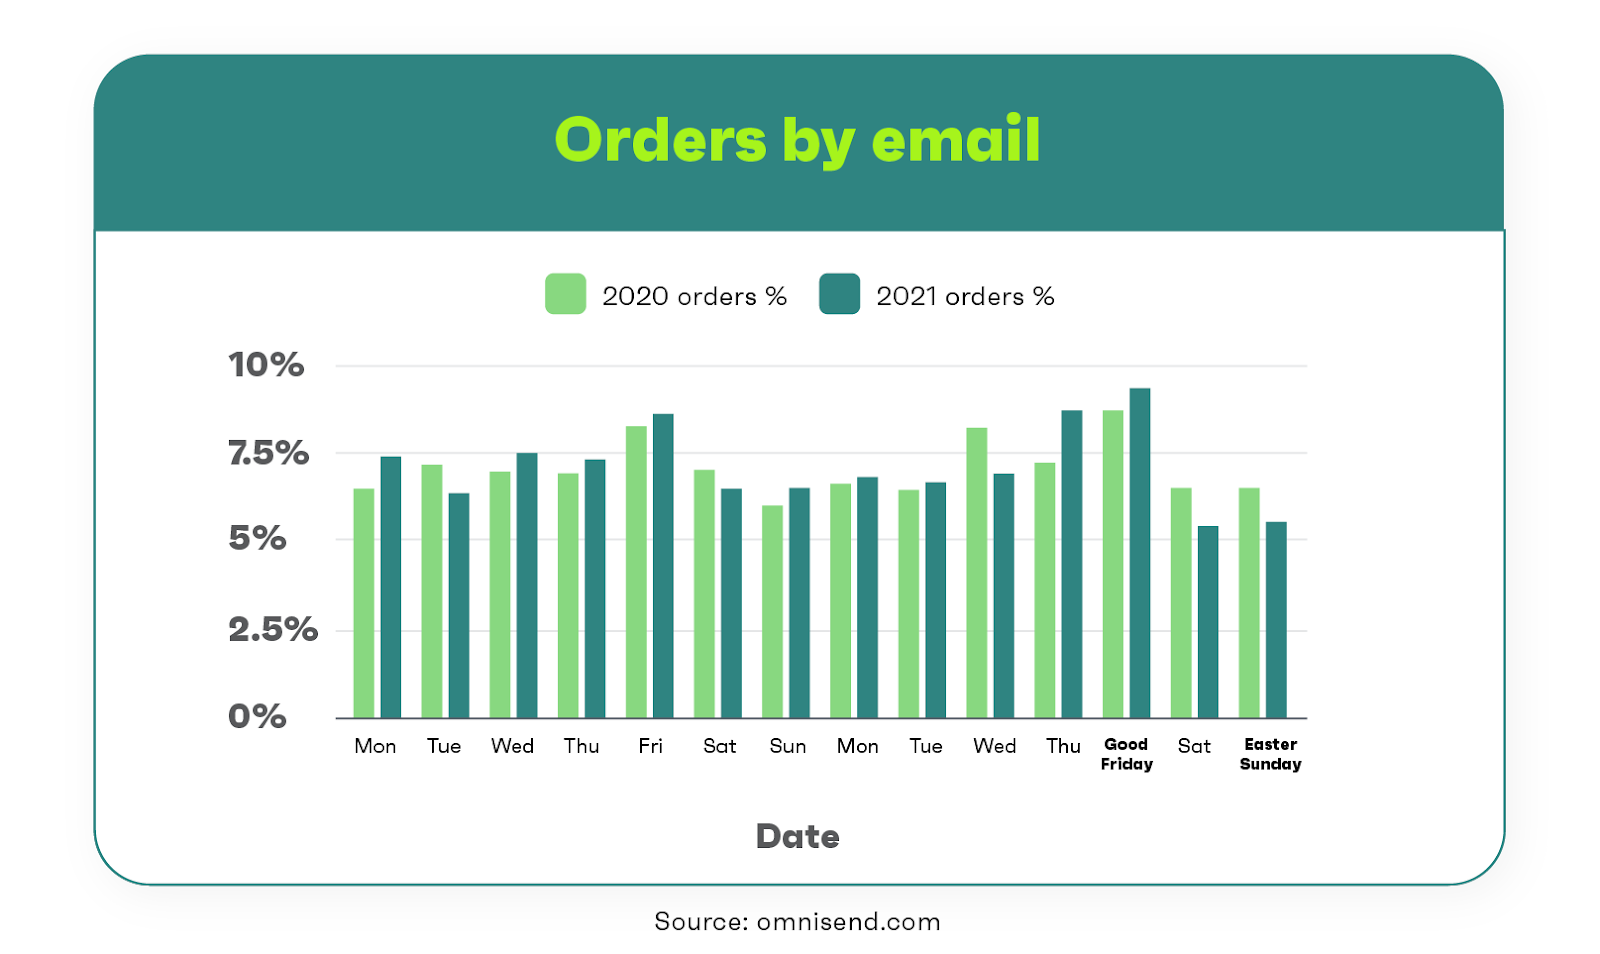 The number of orders by email in March-April of 2020 and 2021